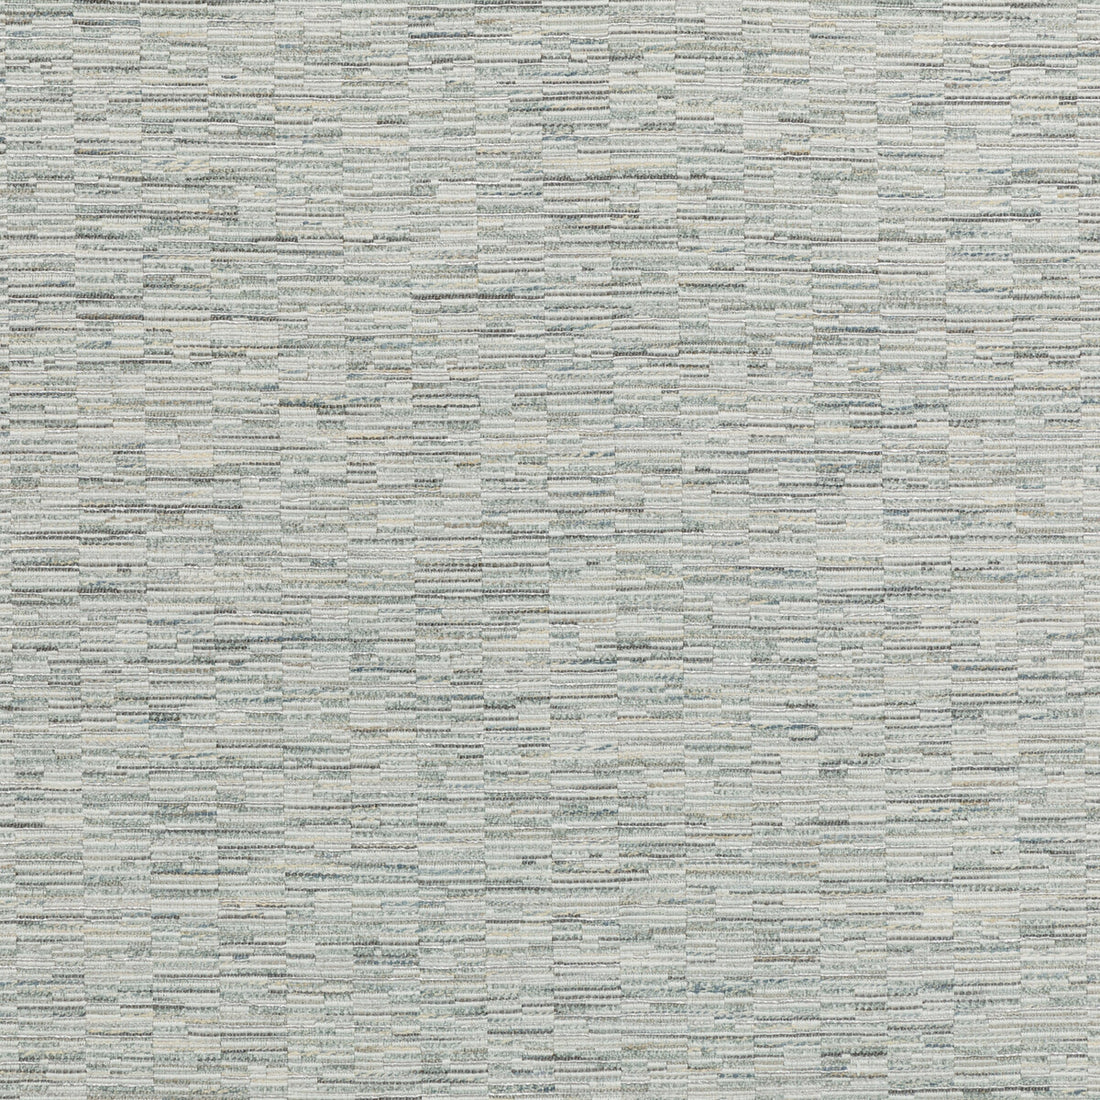 Noni Texture fabric in ice color - pattern 36050.1101.0 - by Kravet Couture in the Luxury Textures II collection